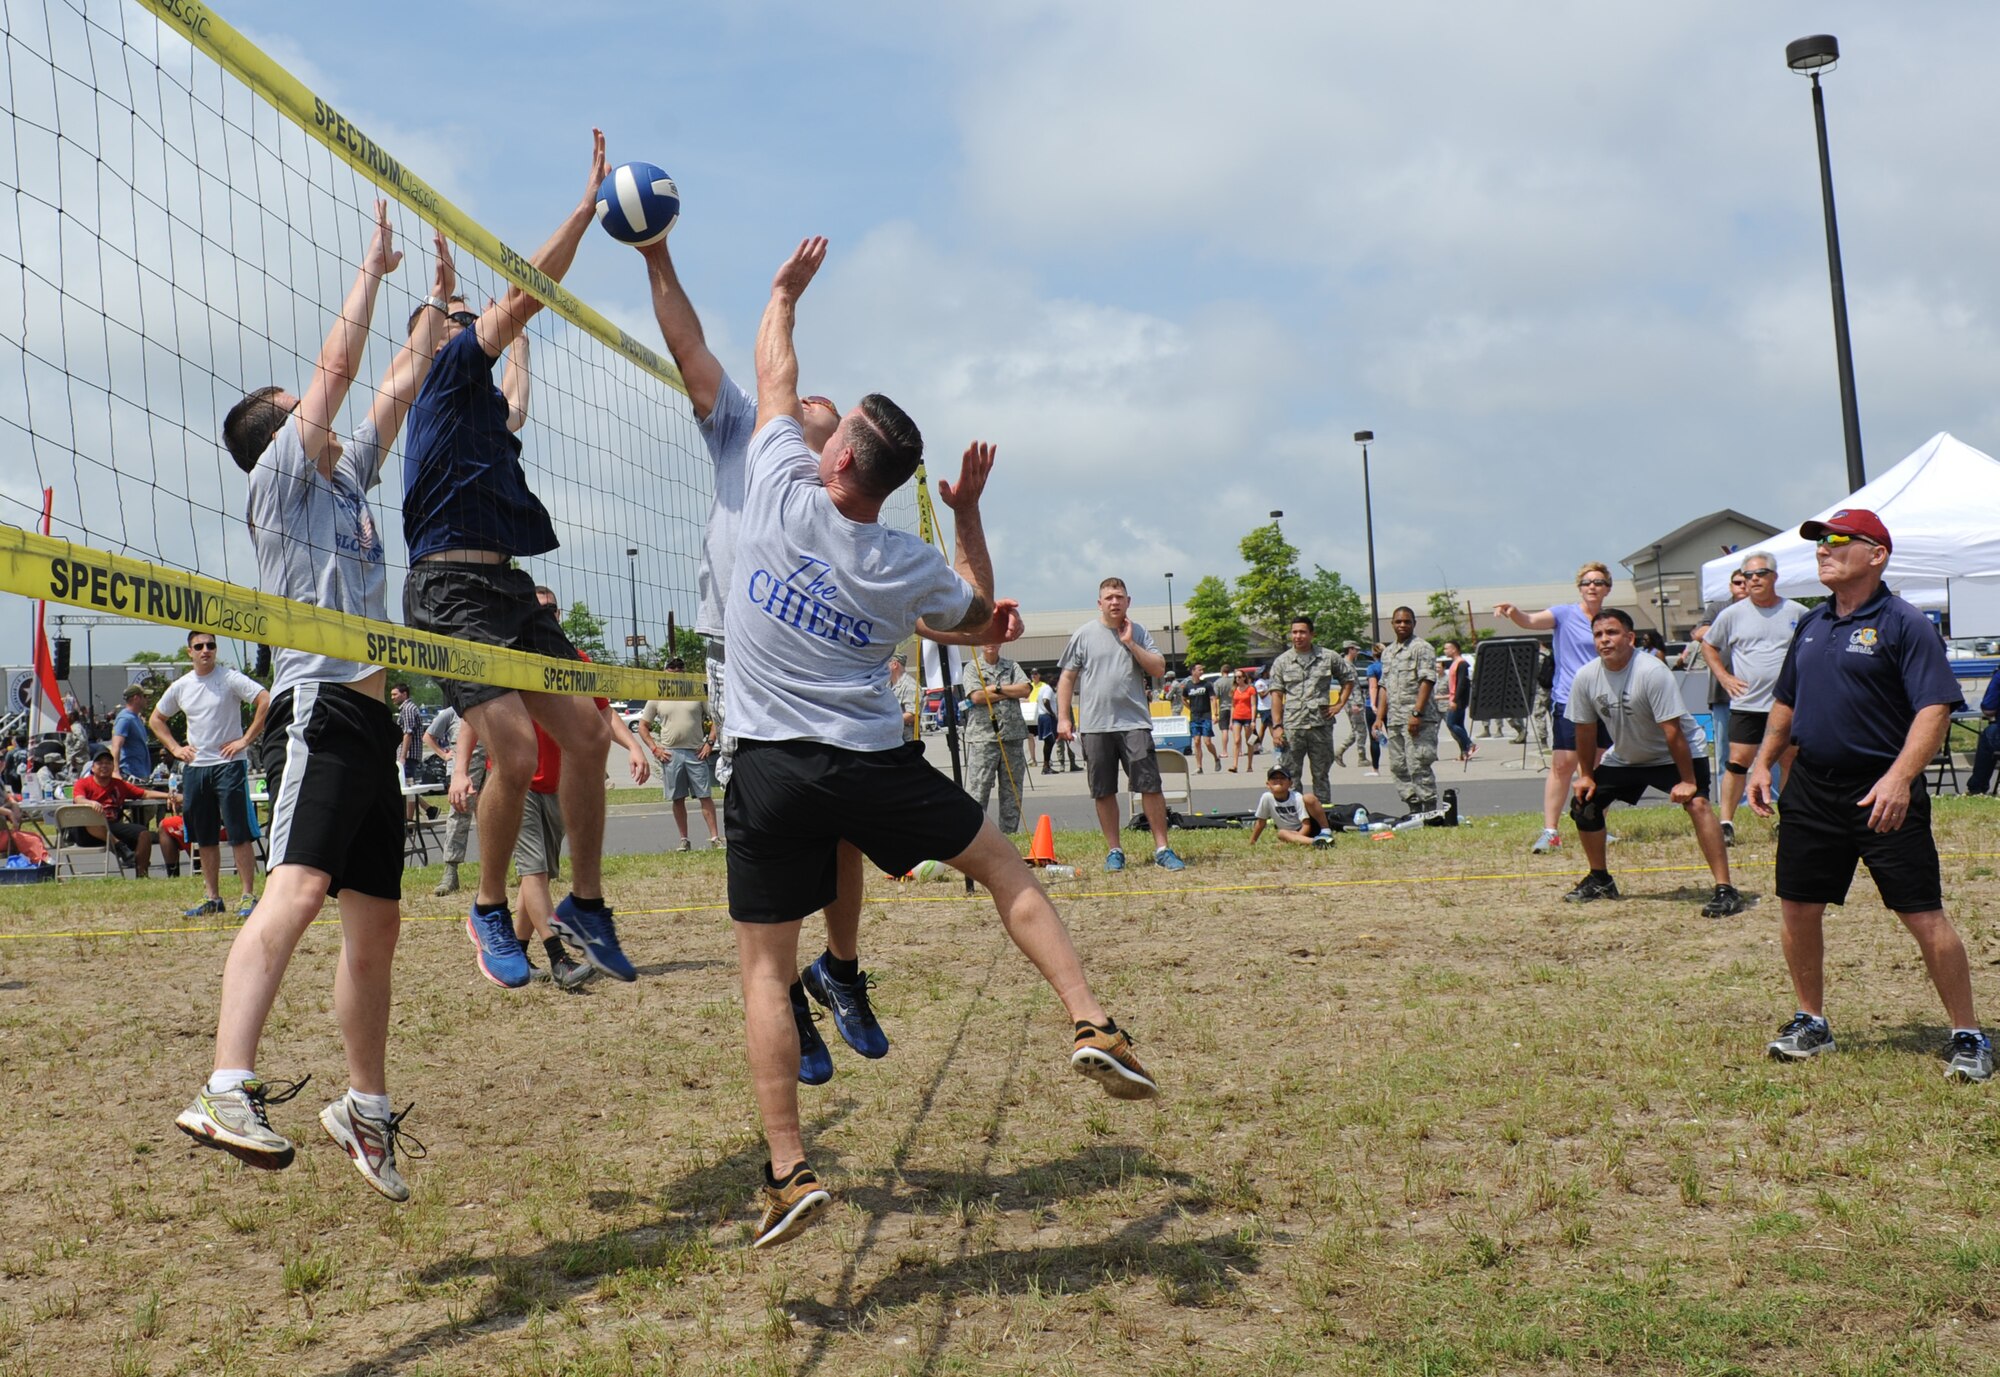 Members of the 81st Training Group volleyball team and “The Chiefs” play volleyball during a burger burn April 29, 2016, Keesler Air Force Base, Miss. The burger burn was the final event of Wingman Week in support of Comprehensive Airman Fitness. (U.S. Air Force photo by Kemberly Groue)